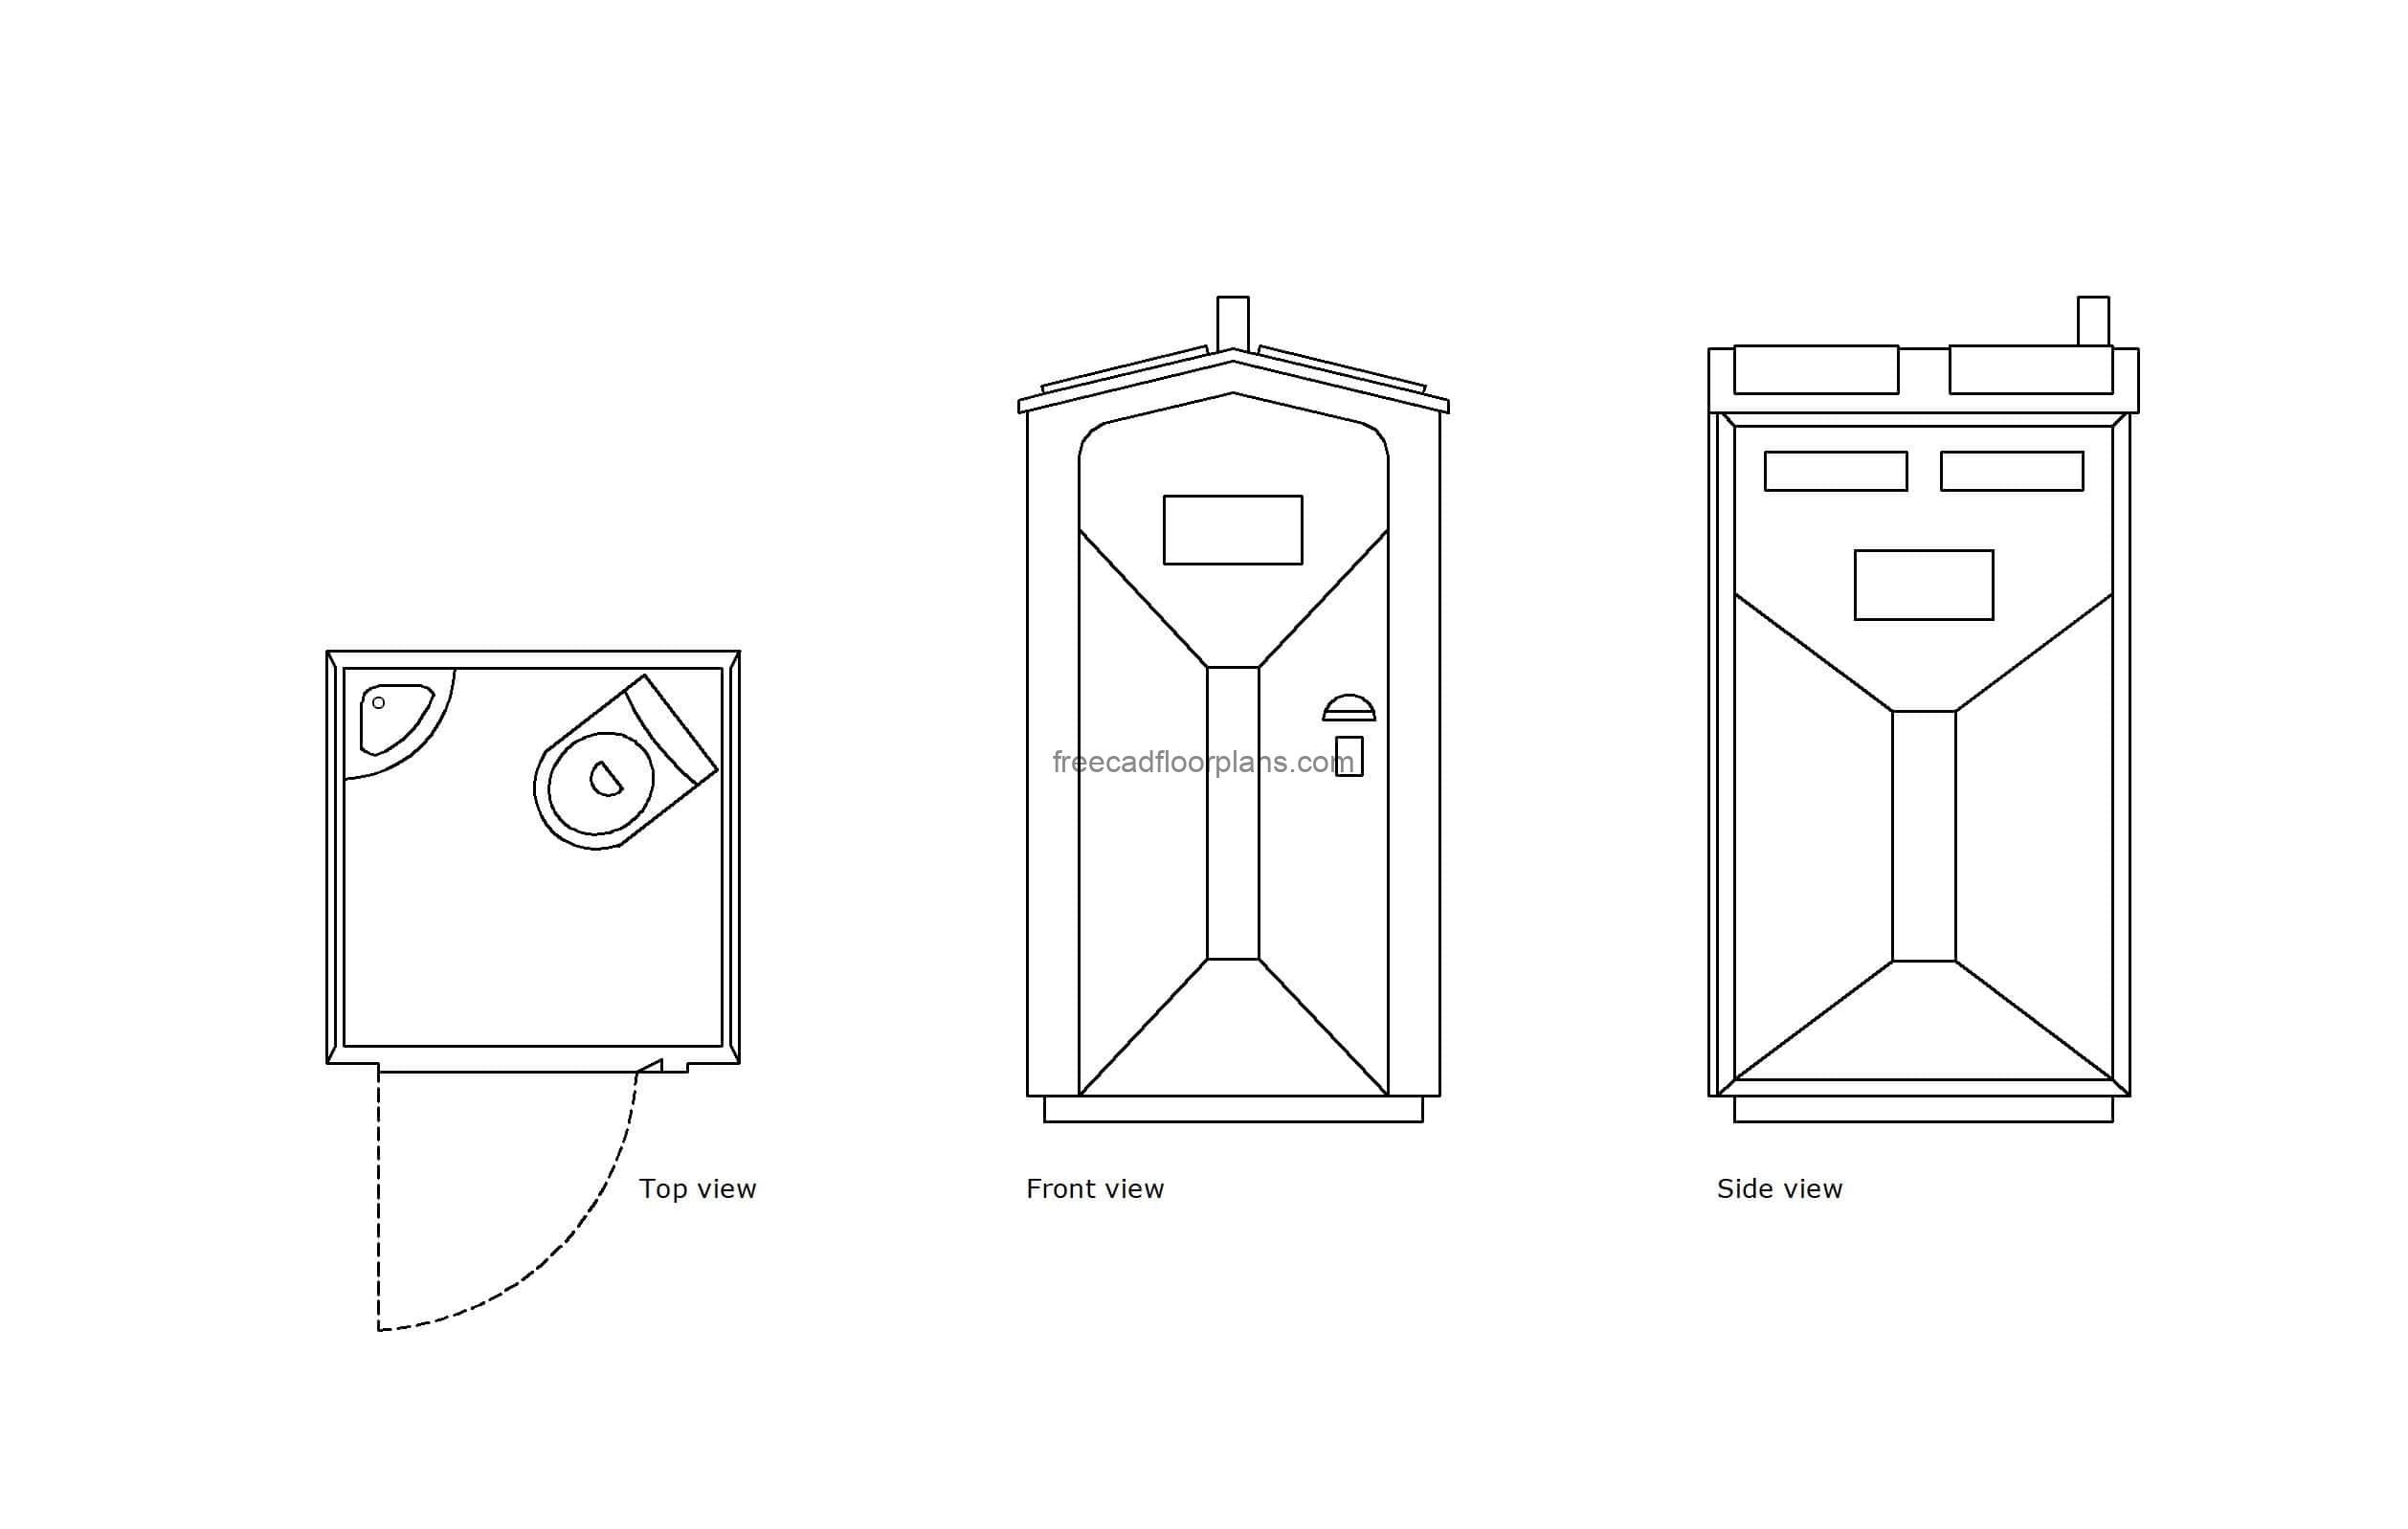 autocad drawing a portable toilet, plan and elevation 2d views, dwg file free for download